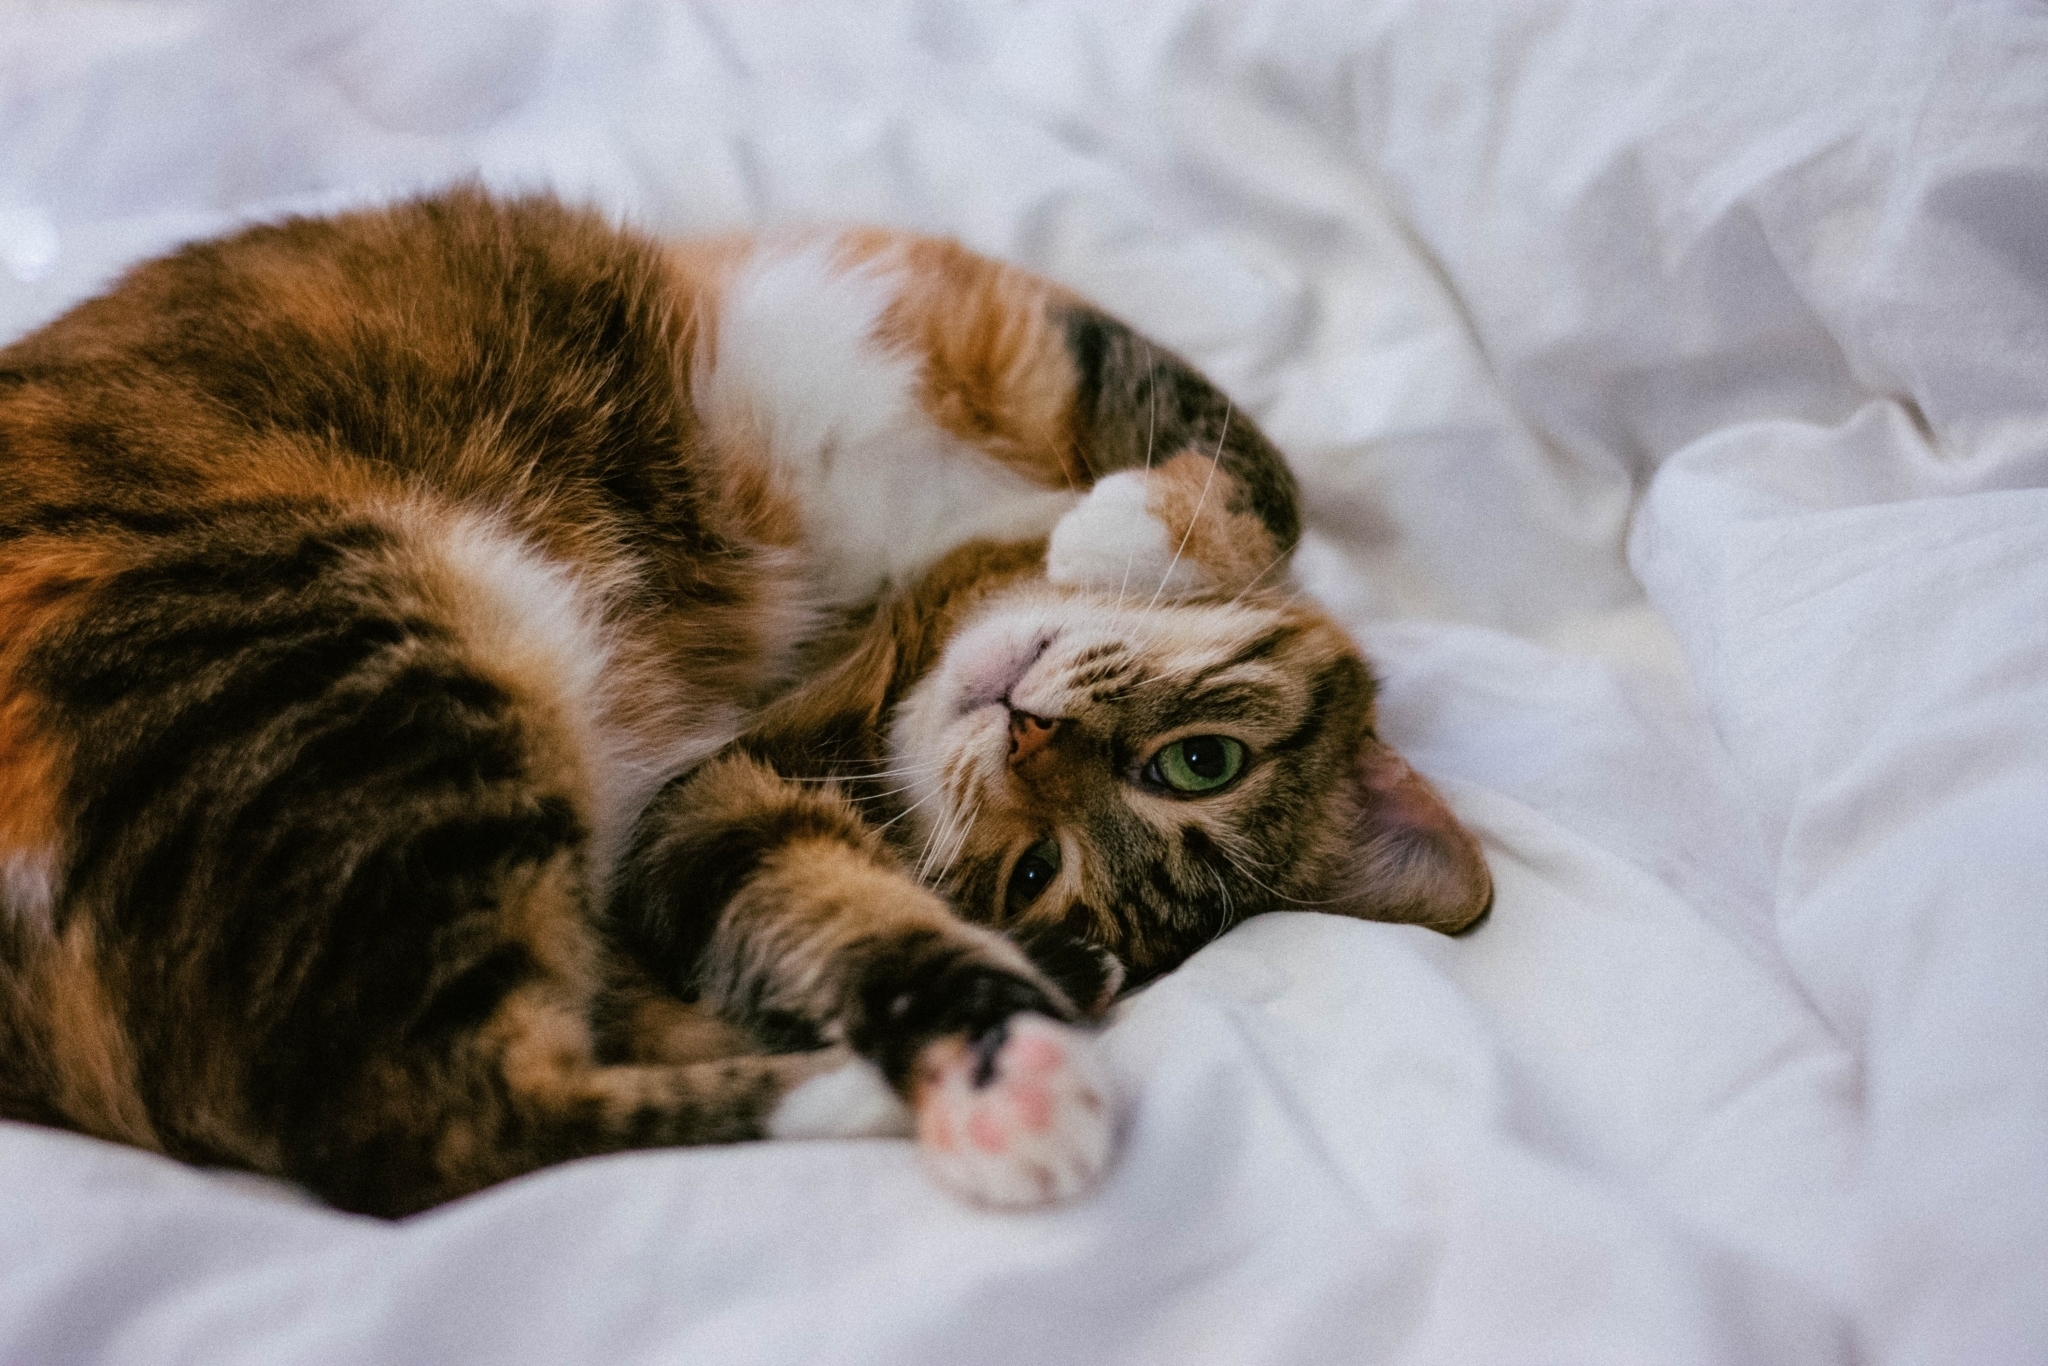 Common skin parasites in cats